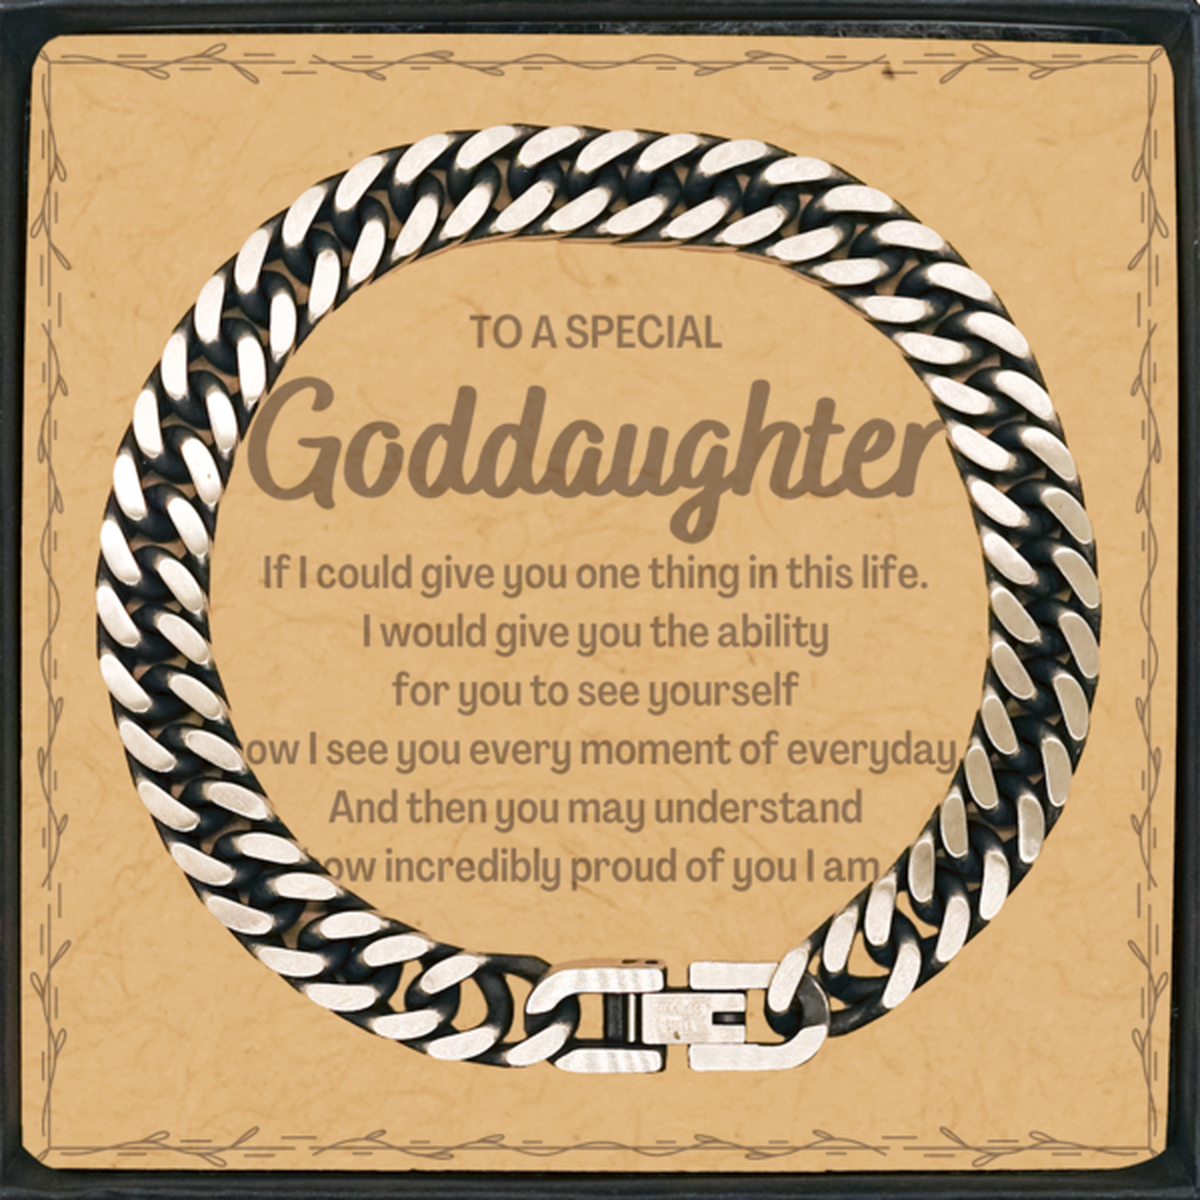 To My Goddaughter Cuban Link Chain Bracelet, Gifts For Goddaughter Message Card, Inspirational Gifts for Christmas Birthday, Epic Gifts for Goddaughter To A Special Goddaughter how incredibly proud of you I am